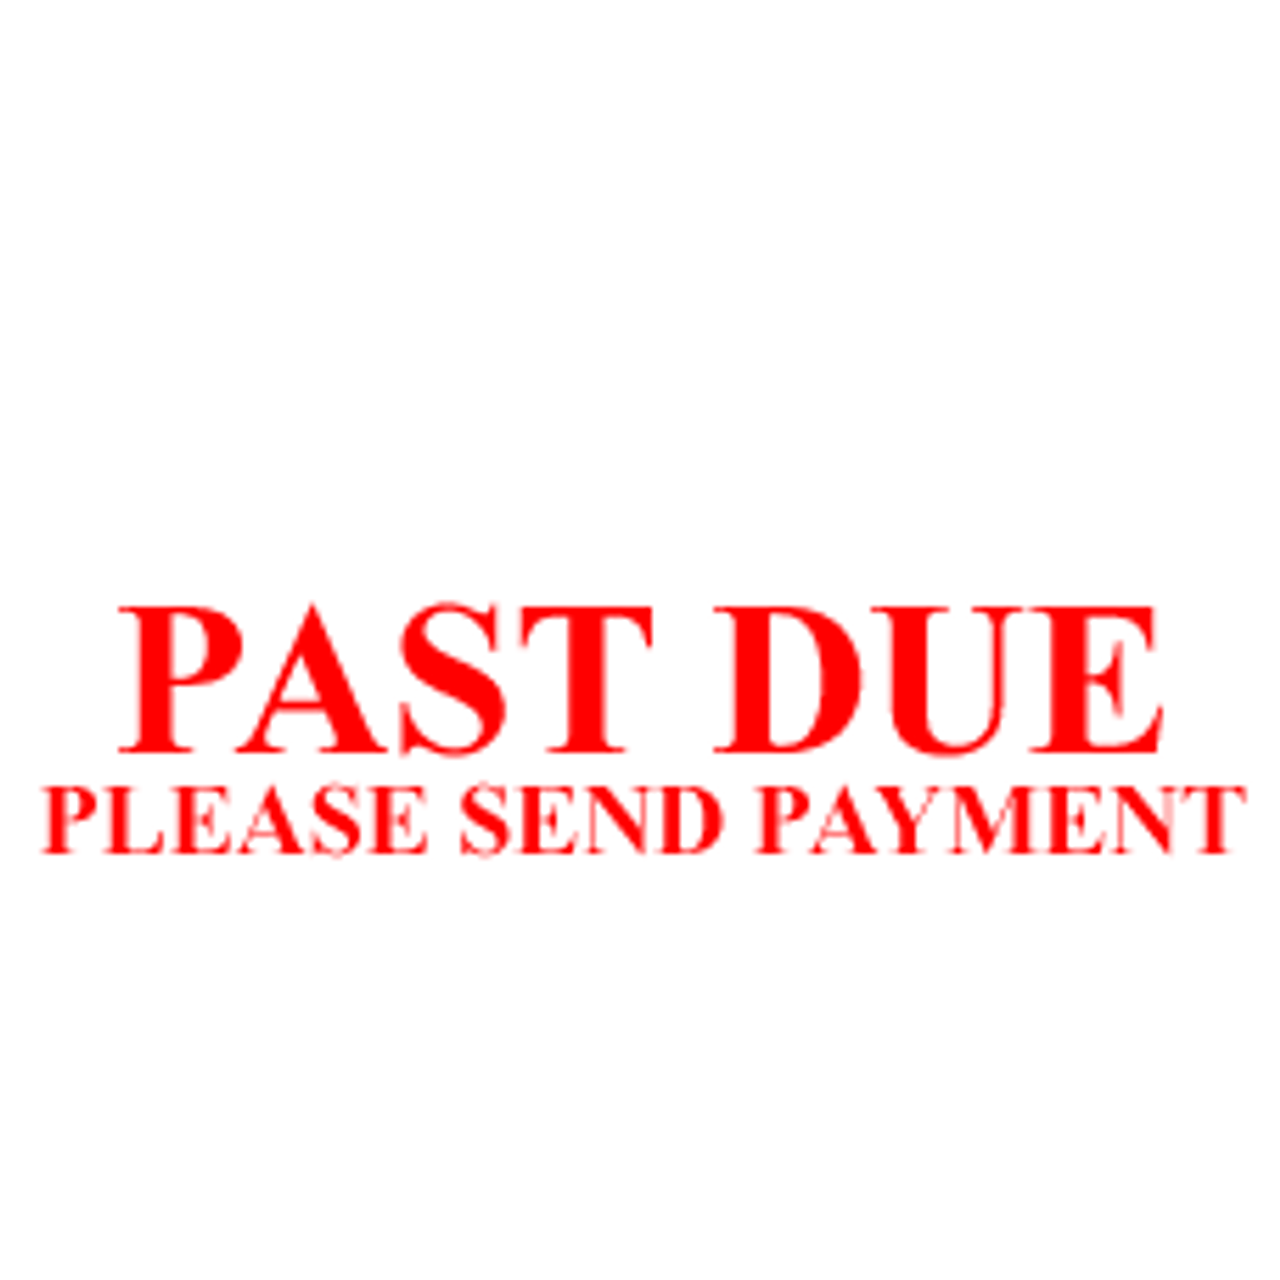 PAST DUE PLEASE SEND PAYMENT Rubber Stamp for office use self-inking